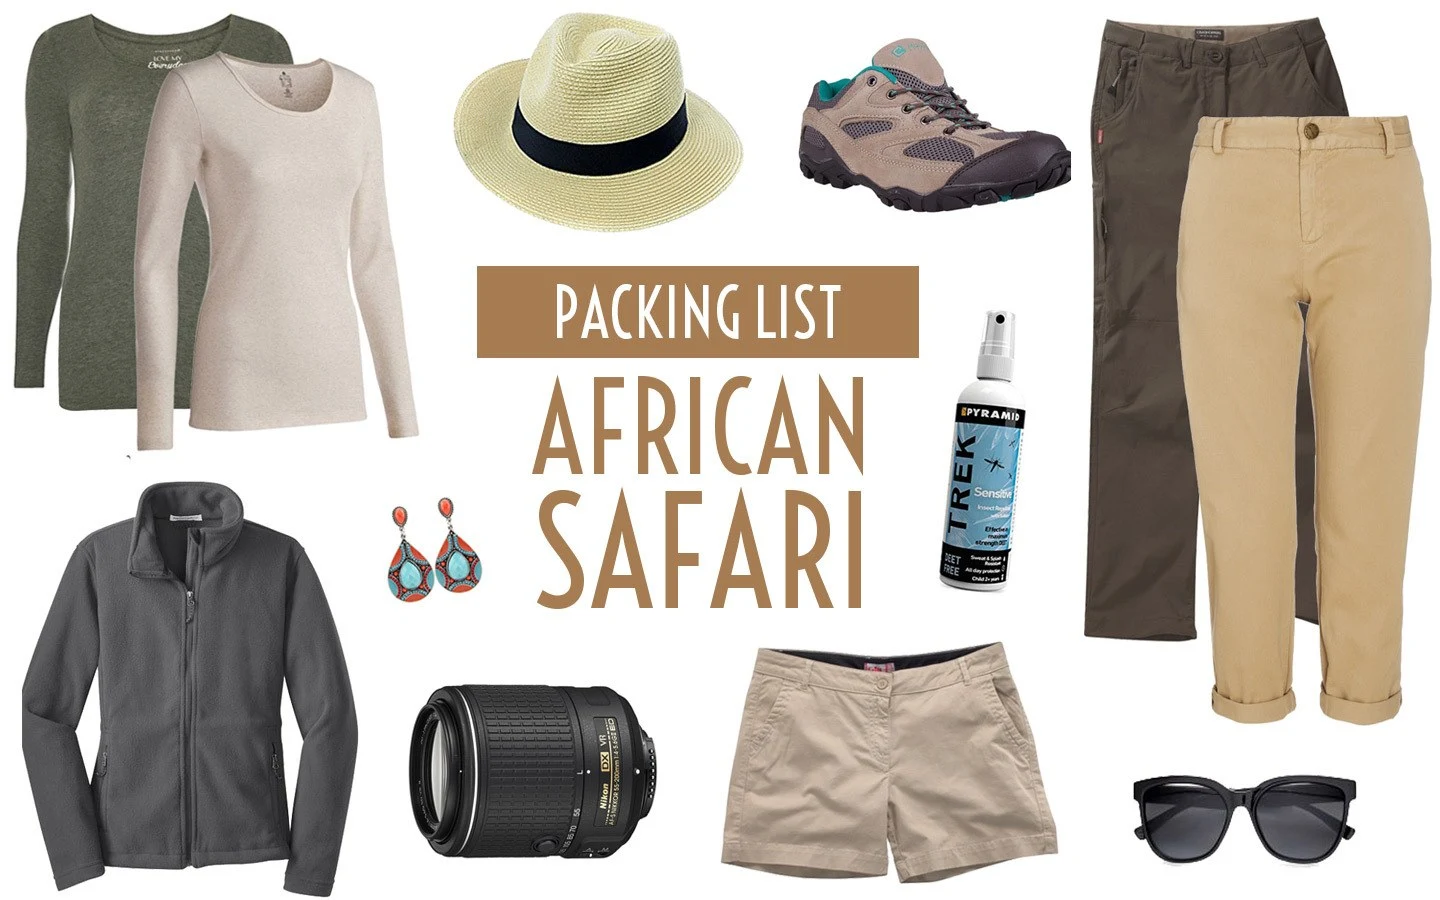 South Africa Safari  What Should I Pack  andBeyond